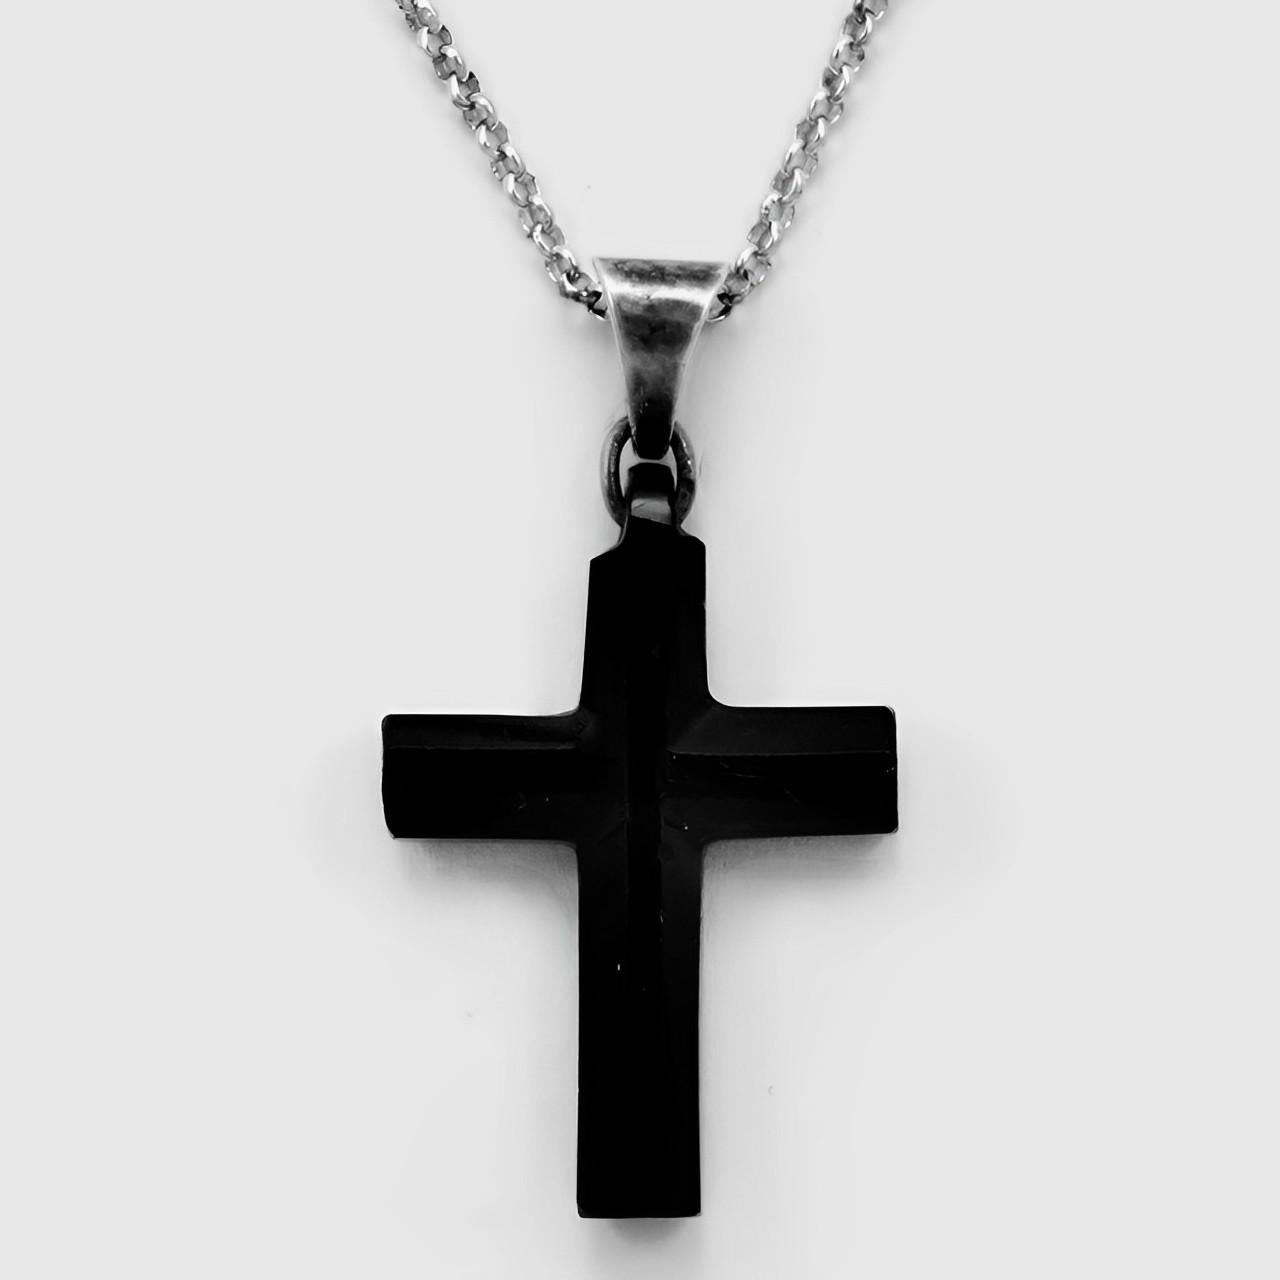 Antique Victorian faceted french jet cross pendant with a silver bail. The bail tests as silver. The cross hangs on a quality modern silver belcher chain, which is adjustable and soldered on each link. Measuring length 45.9 cm / 18 inches, and the